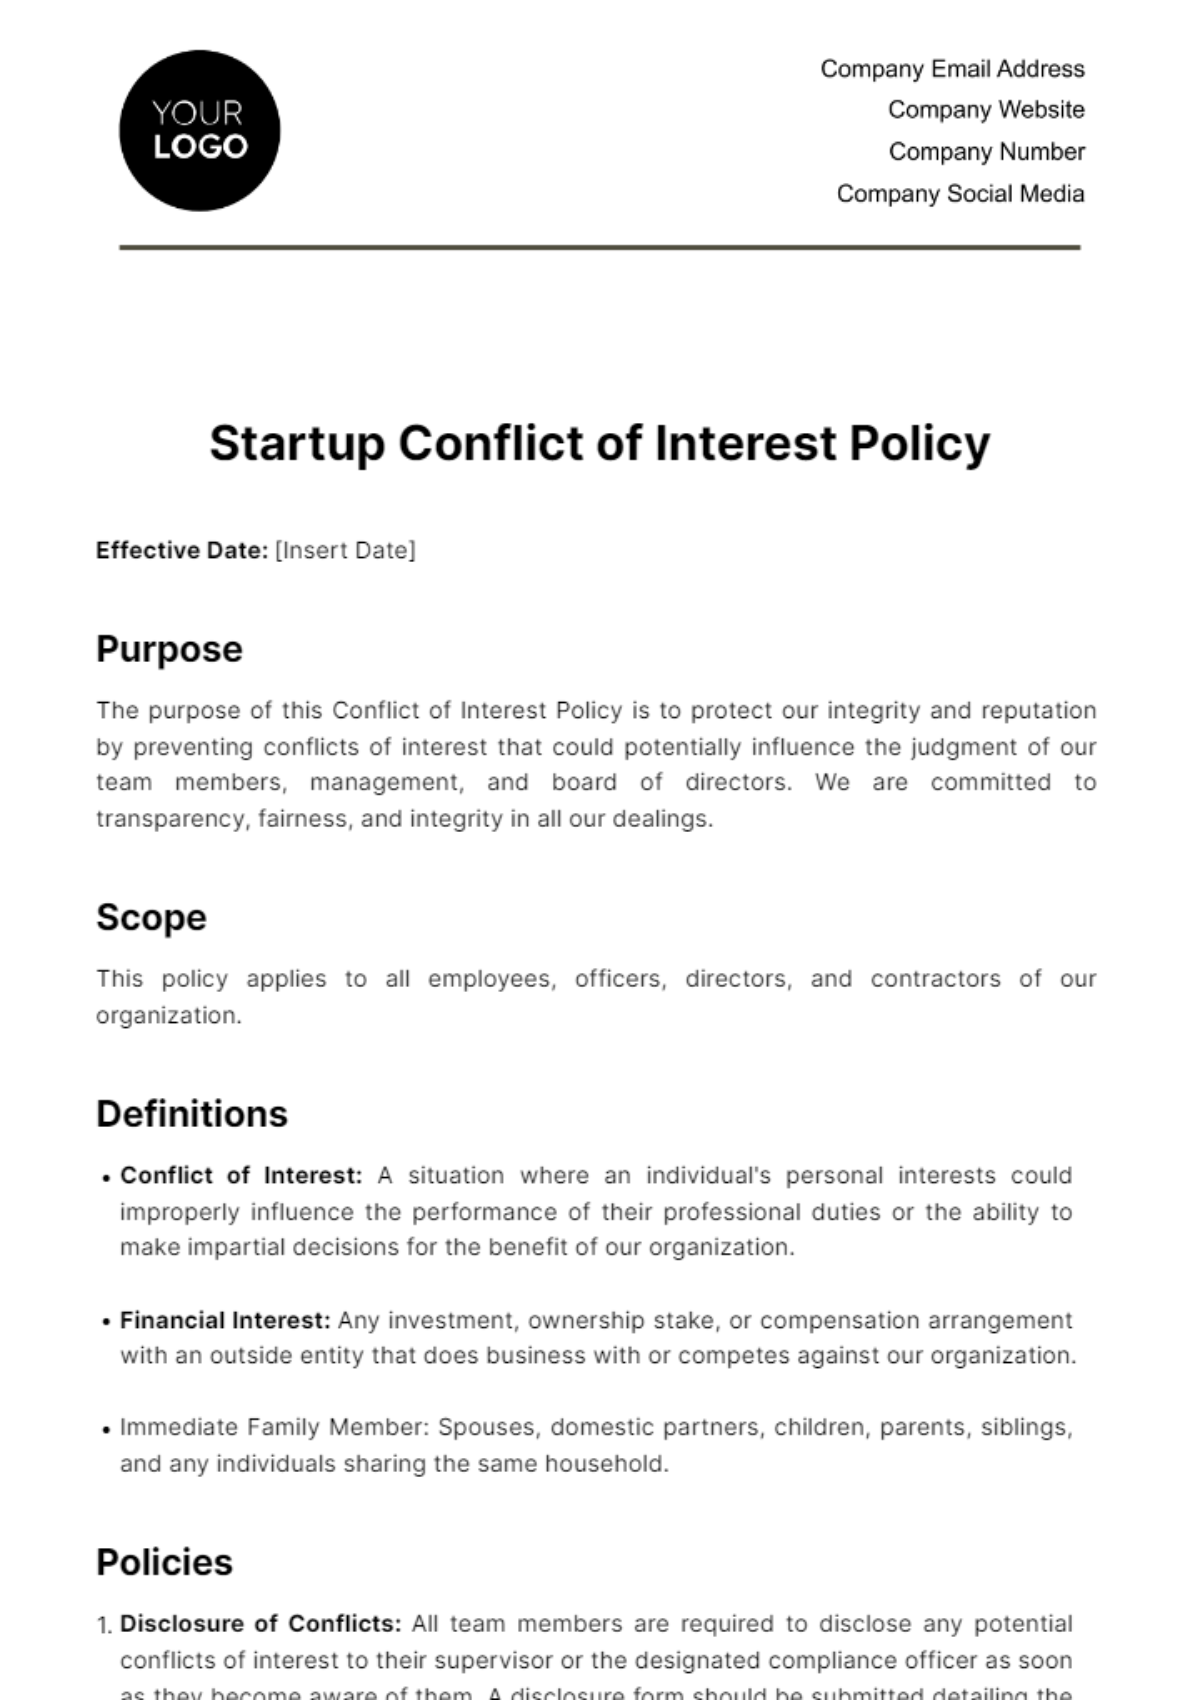 Free Startup Conflict of Interest Policy Template